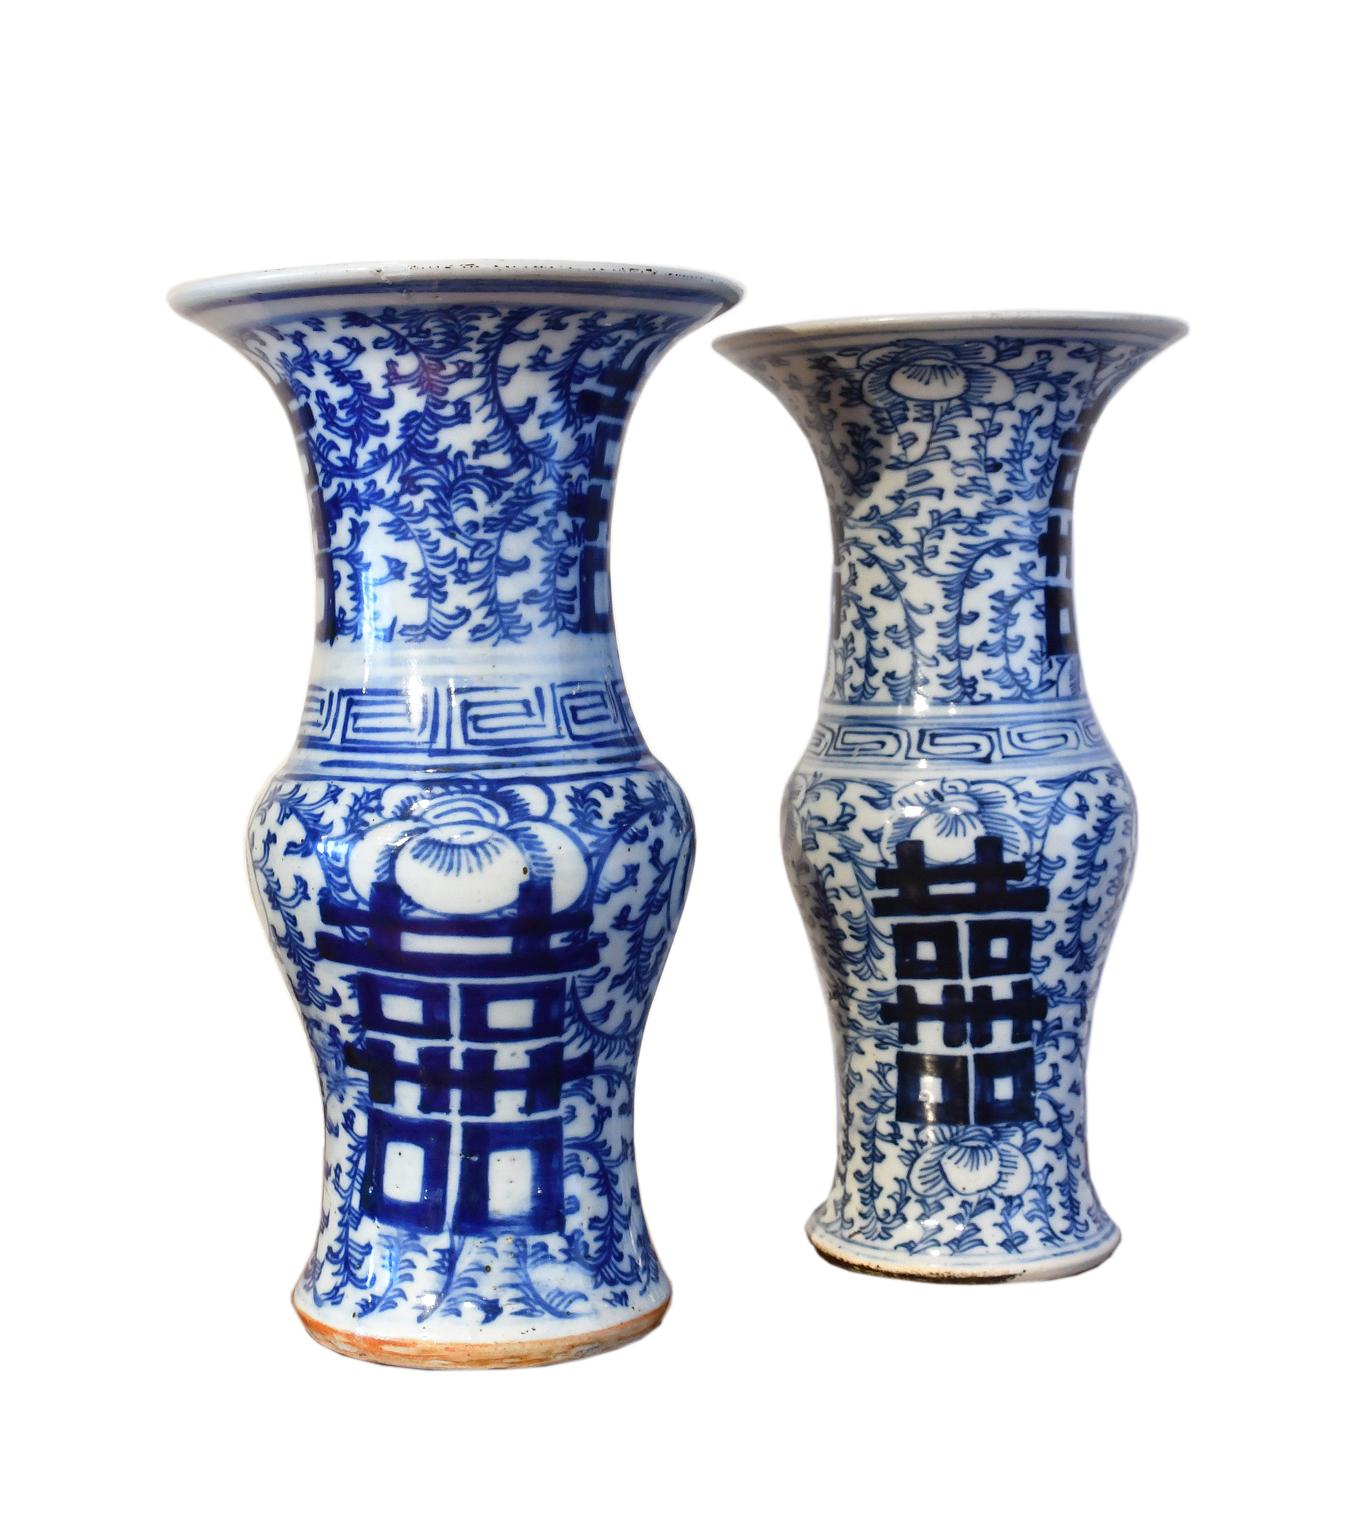 A beautiful set of two Chinese porcelain gu-form vases with hand painted cobalt blue decoration of 